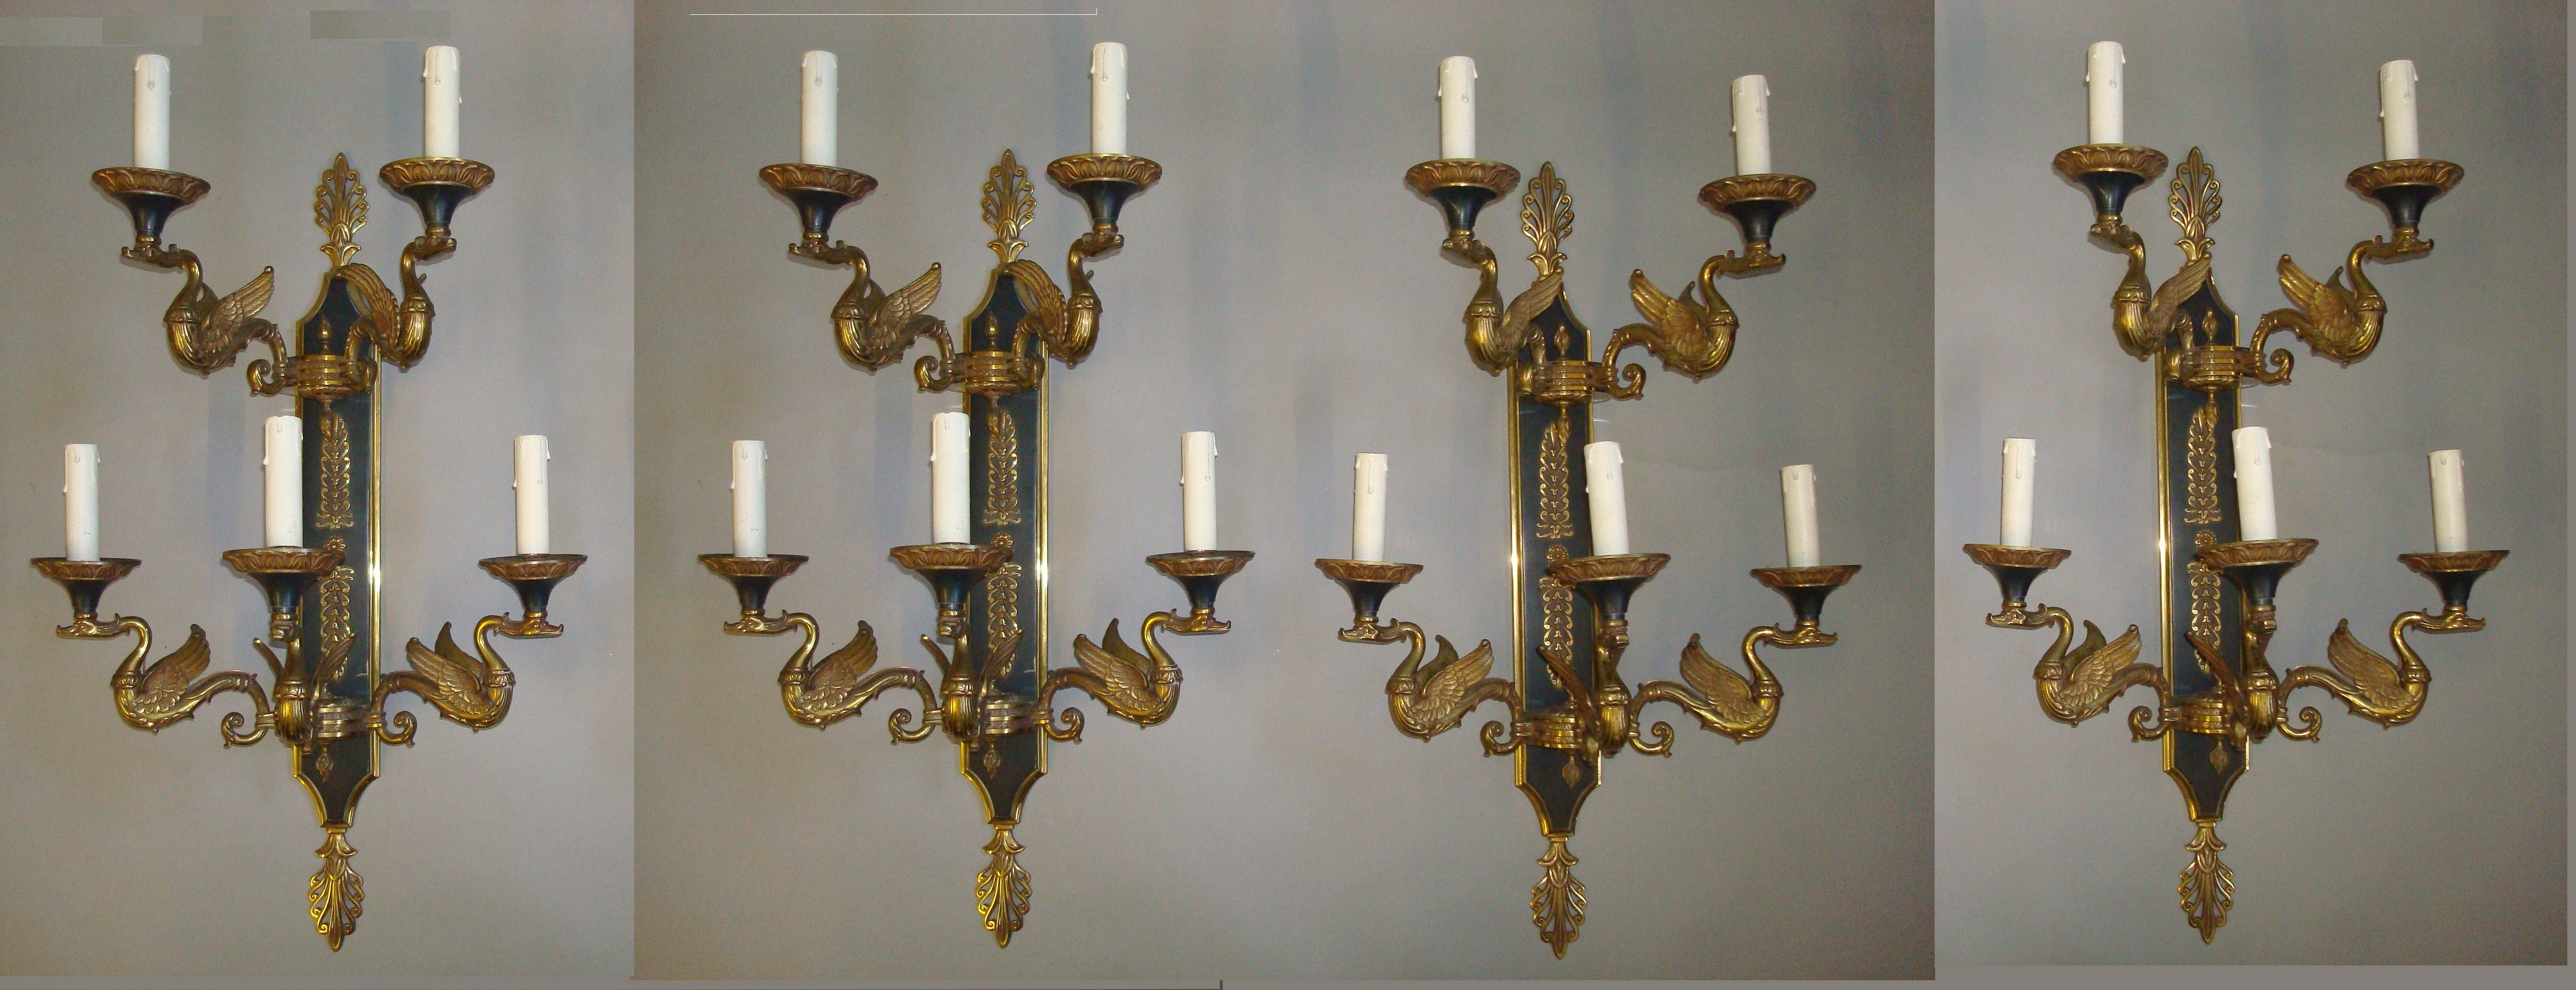 Exceptional Empire Style Set of Four Large Gilt Brass Wall Sconces / Lights